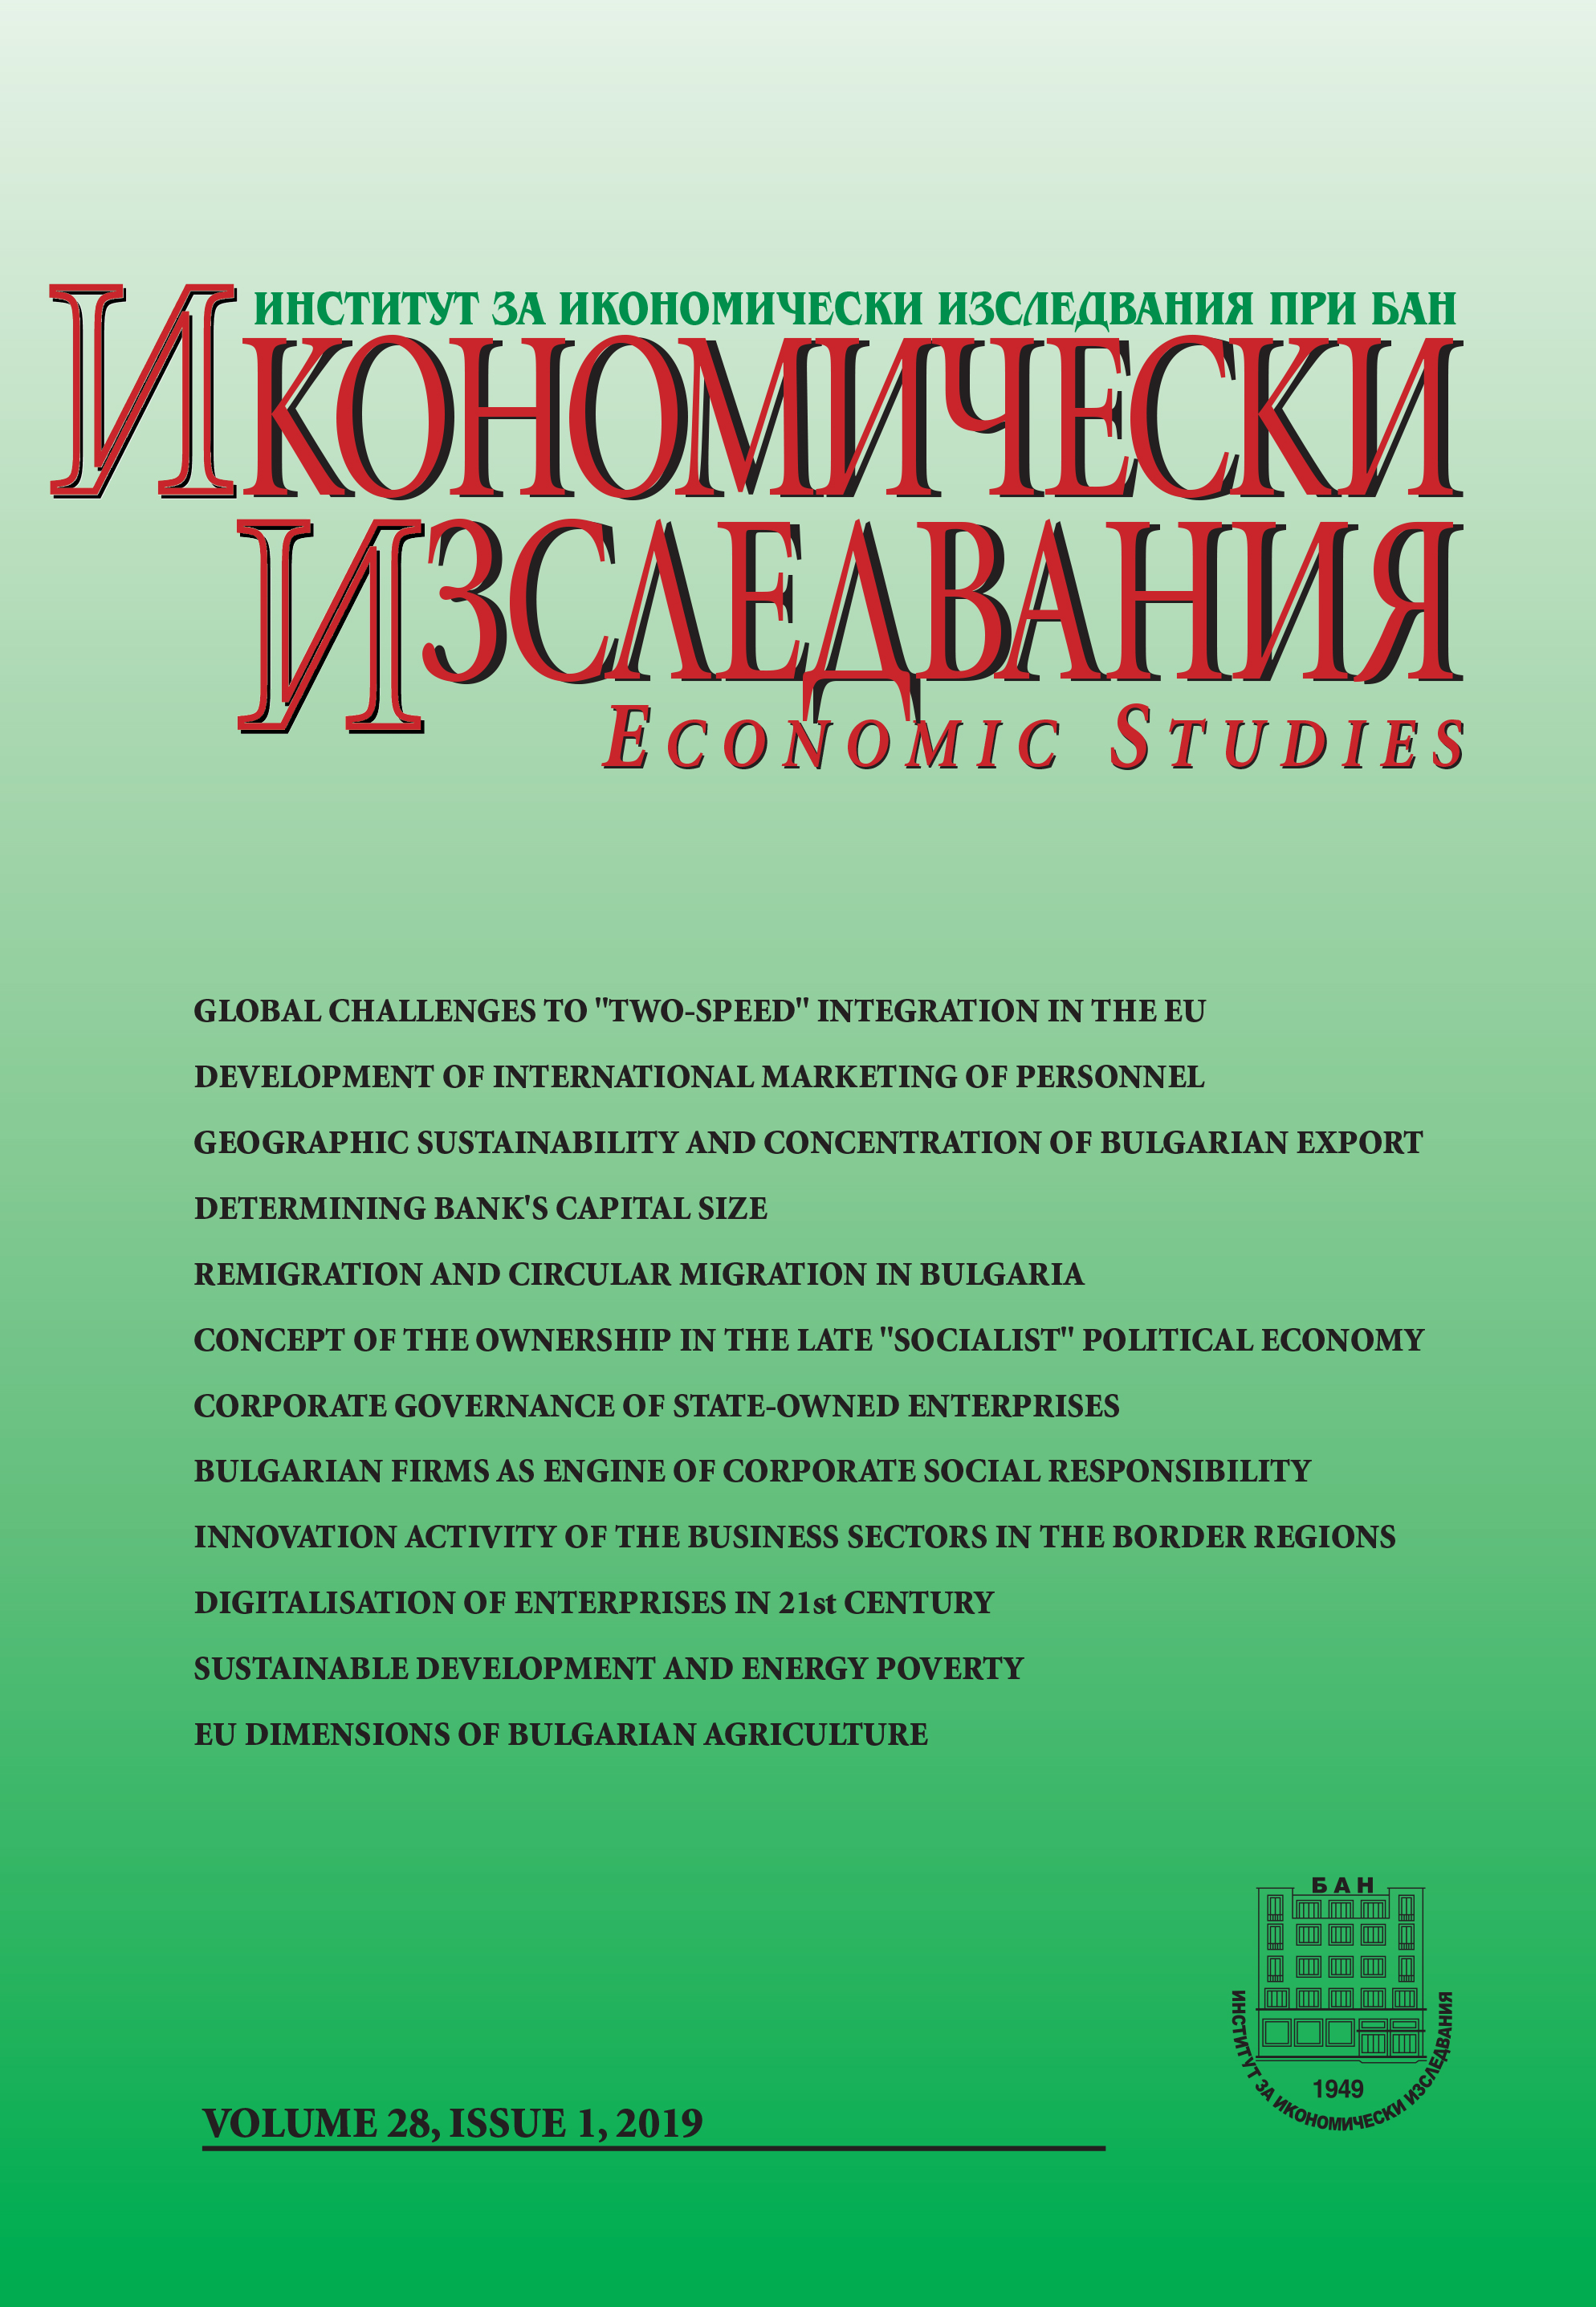 Innovation Activity of the Business Sectors in the Border Regions of the Republic of Bulgaria and the Republic of Macedonia Cover Image